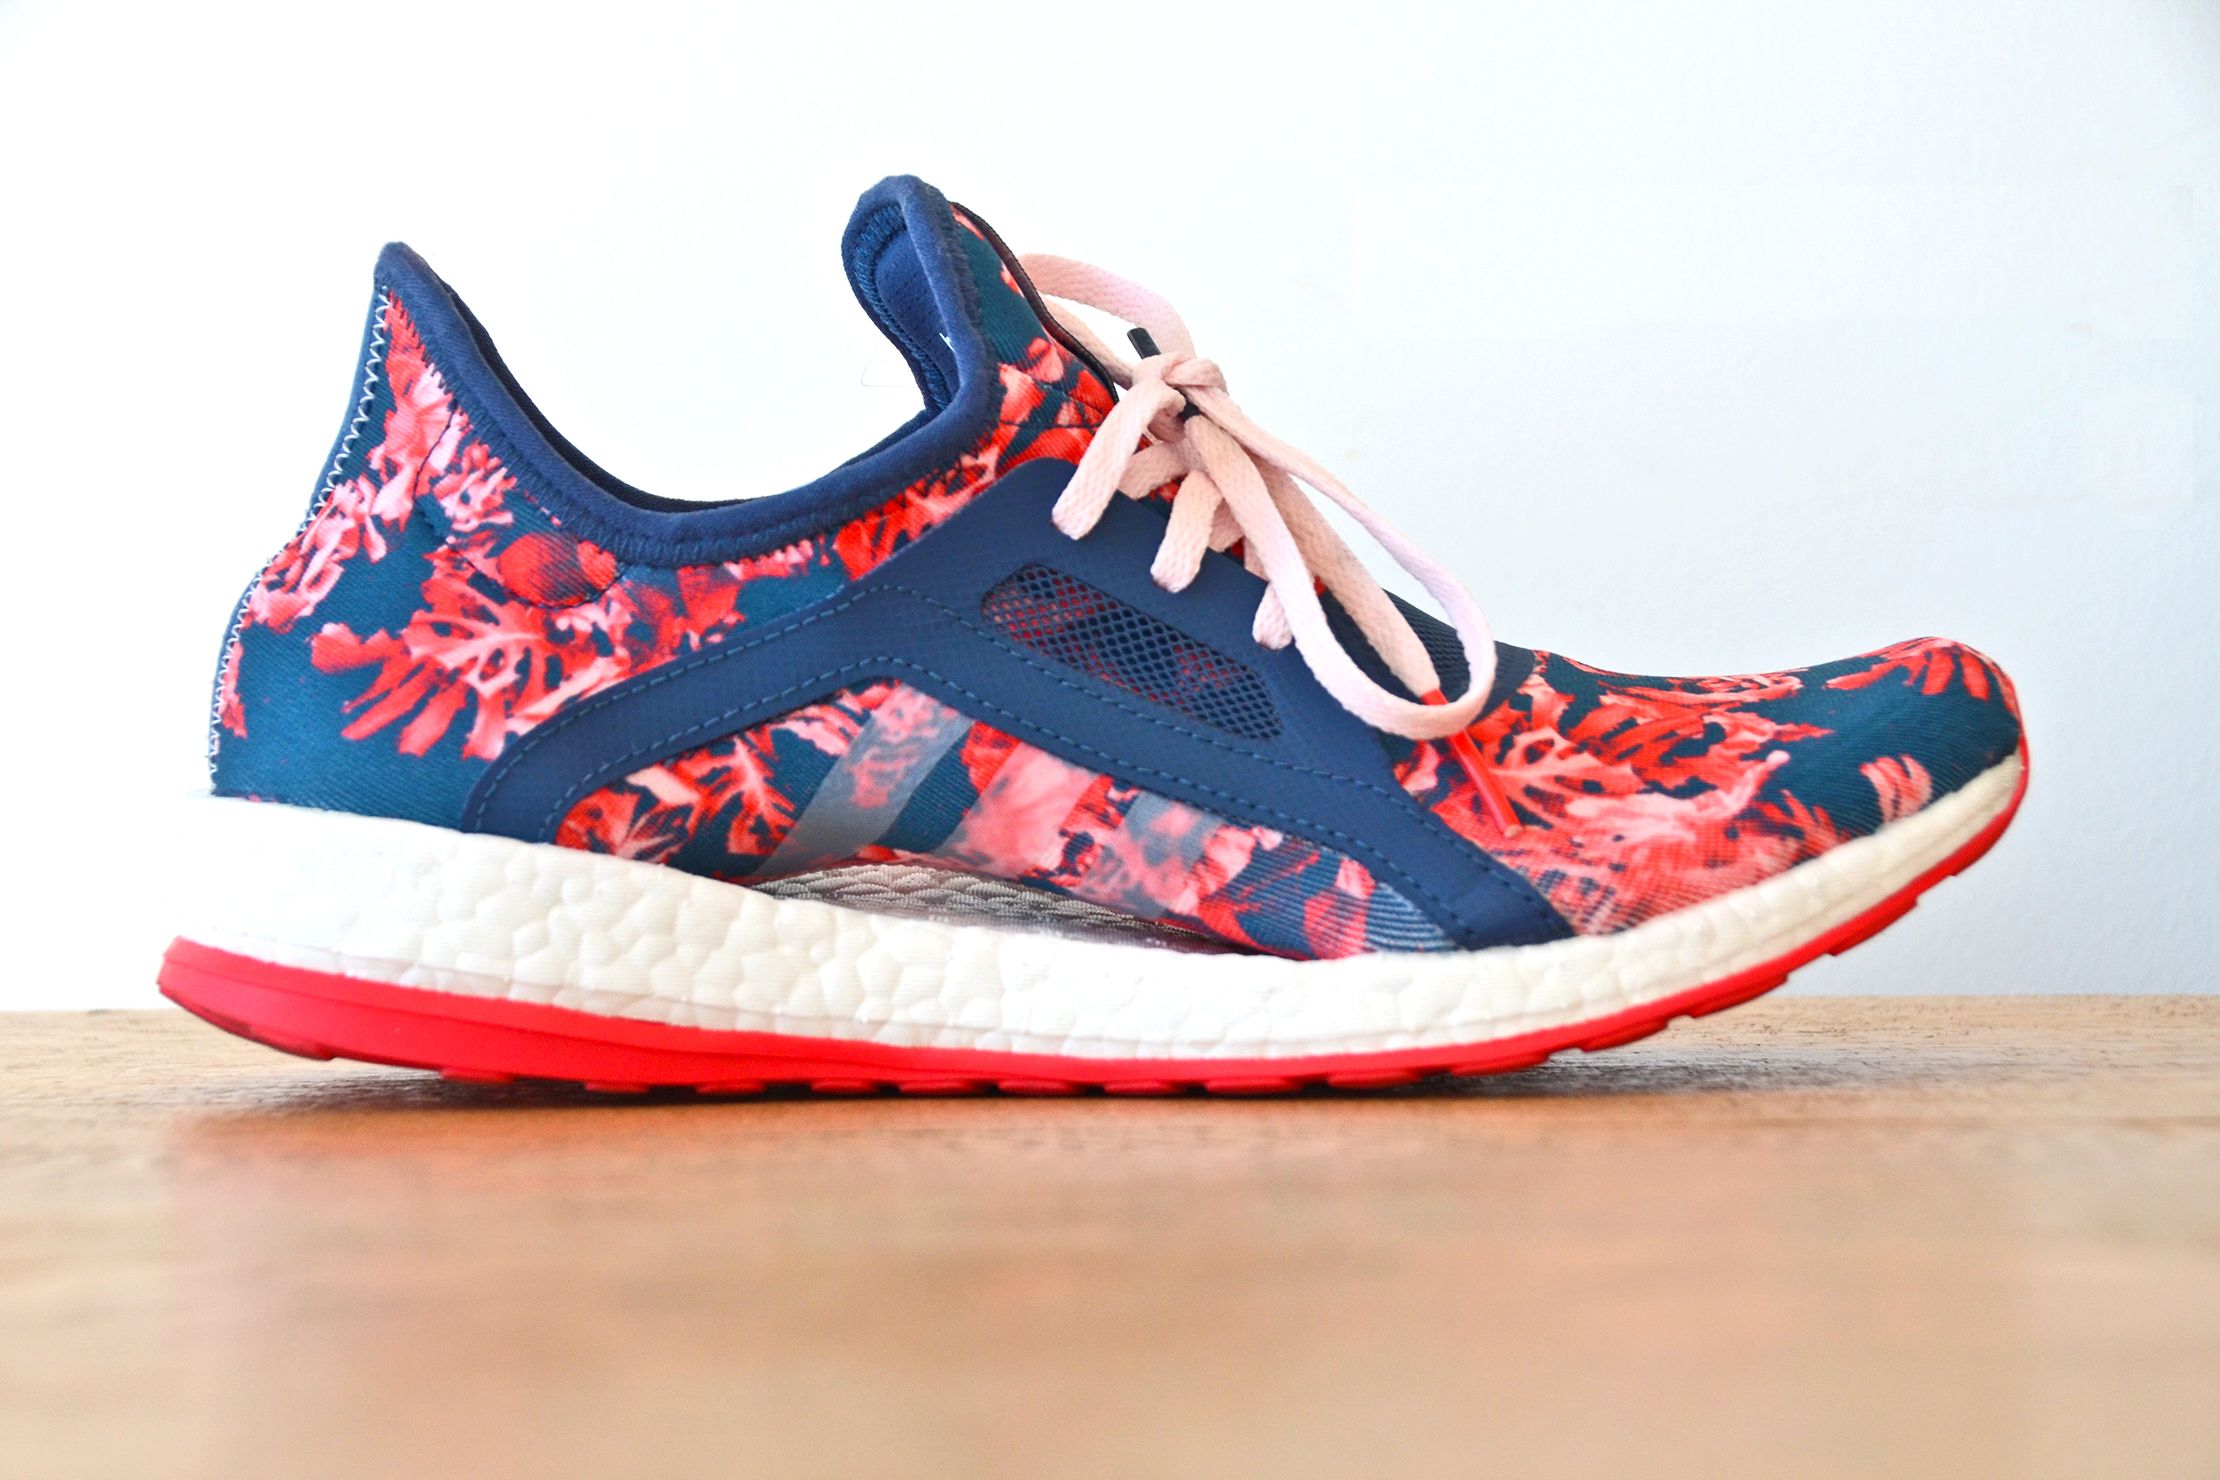 adidas pure boost x floral